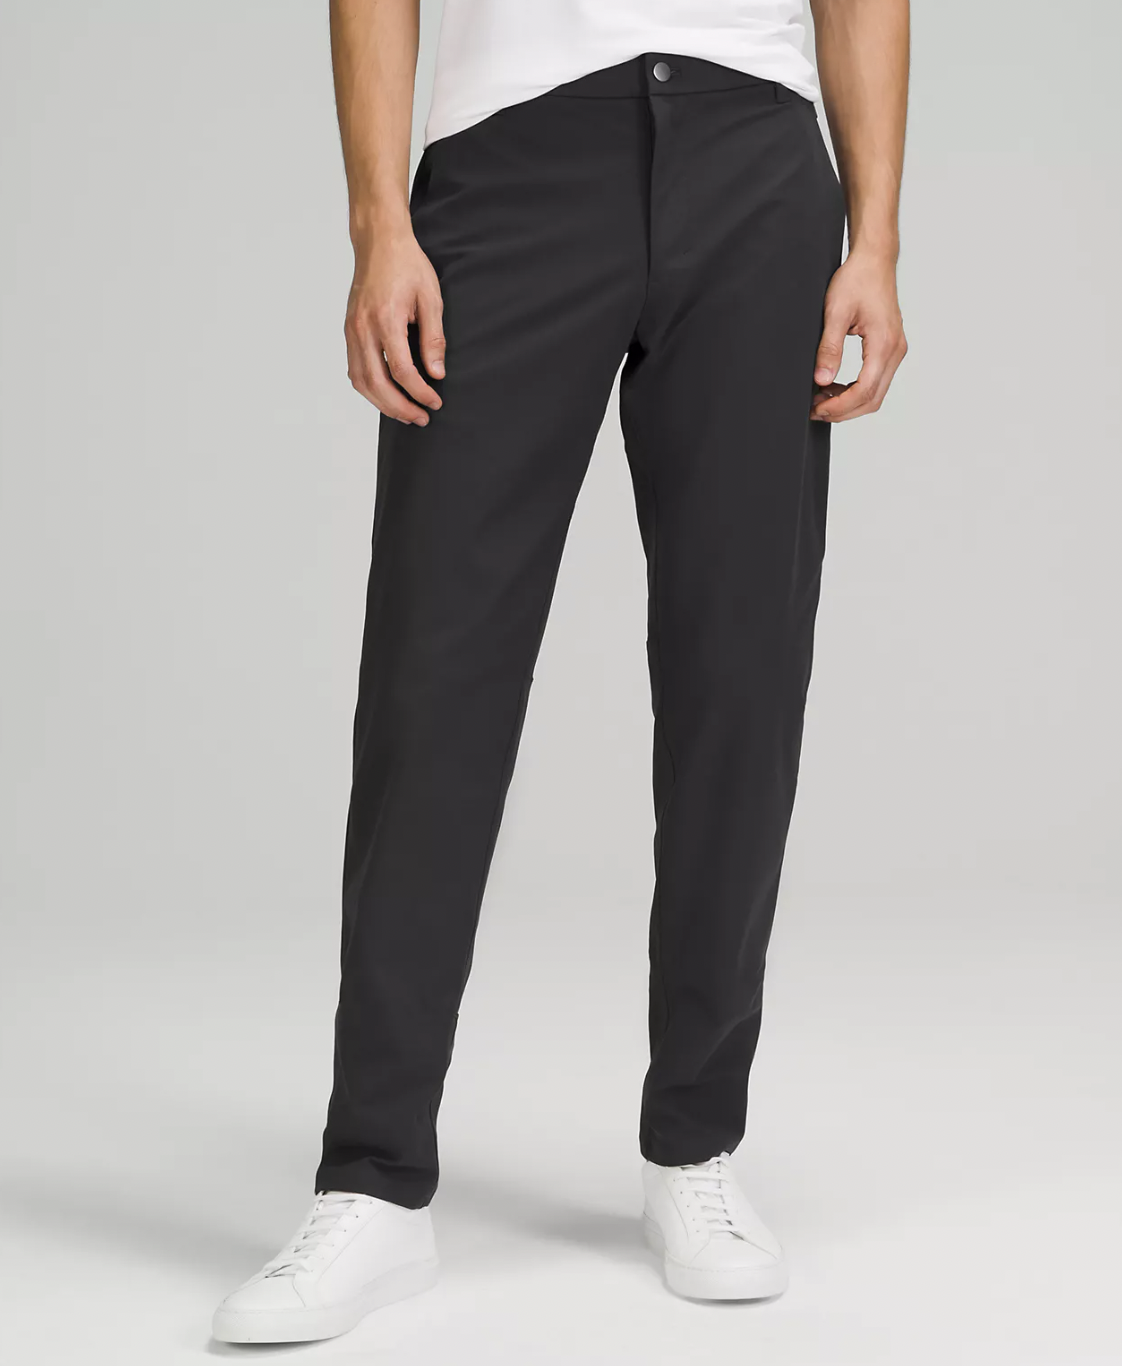 Business Casual Basics Part II Dress Pants  From Squalor to Baller